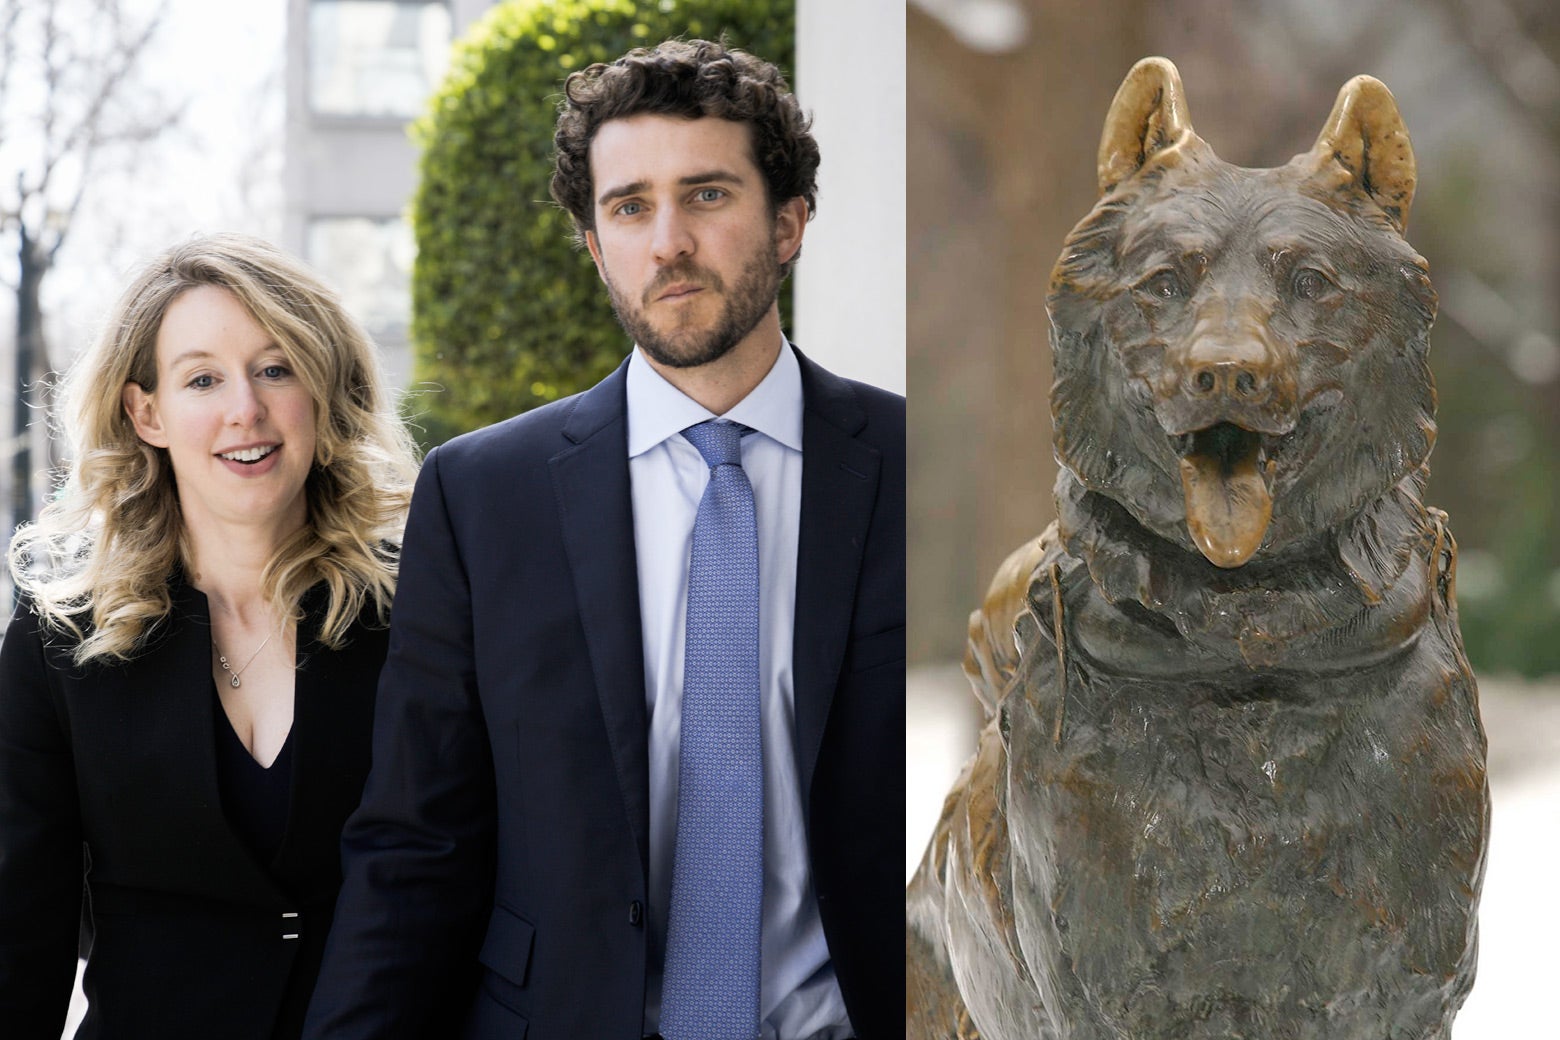 Left: A blond woman and a brunette man. Right: A statue of a dog. 